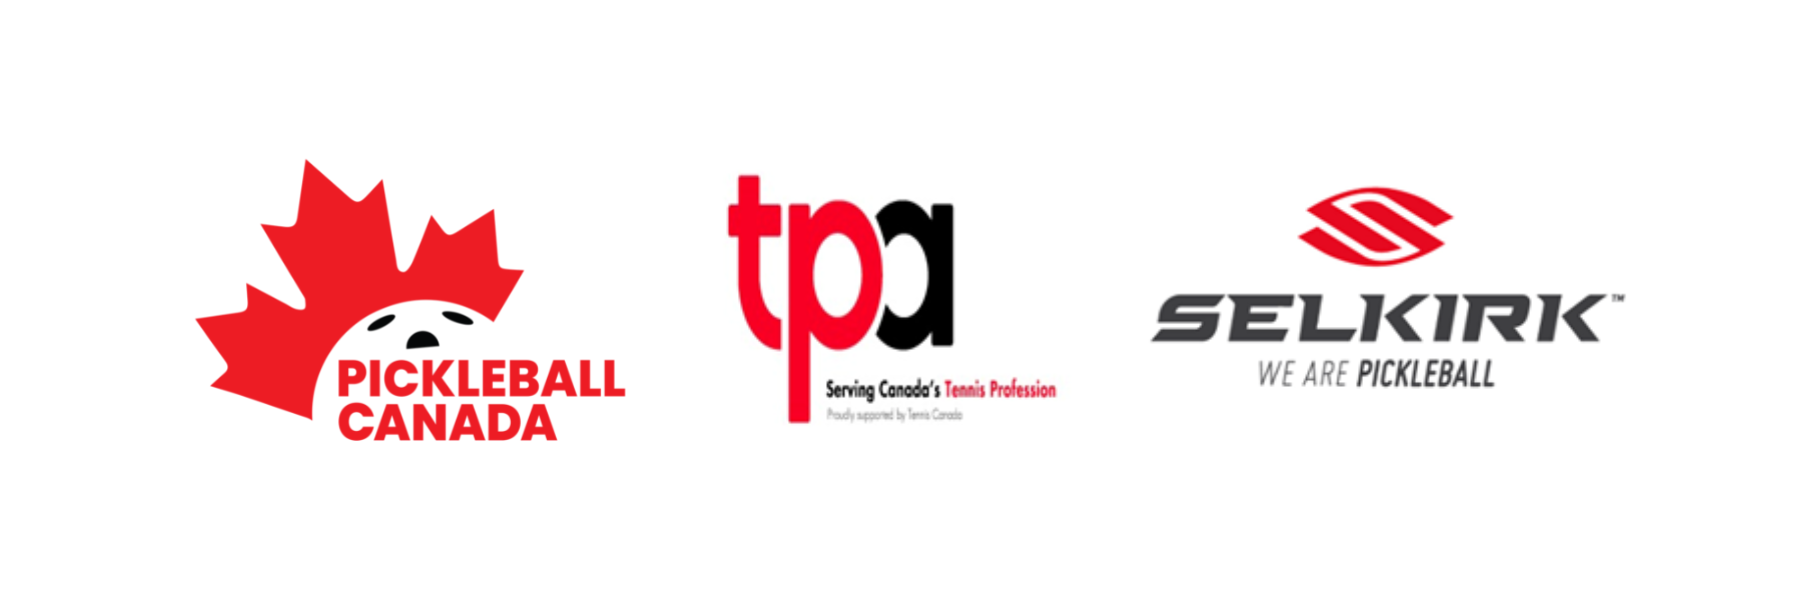 The Tennis Professionals Association and Pickleball Canada Announce the Pickleball Coach Education Program Partnership with Selkirk Sport